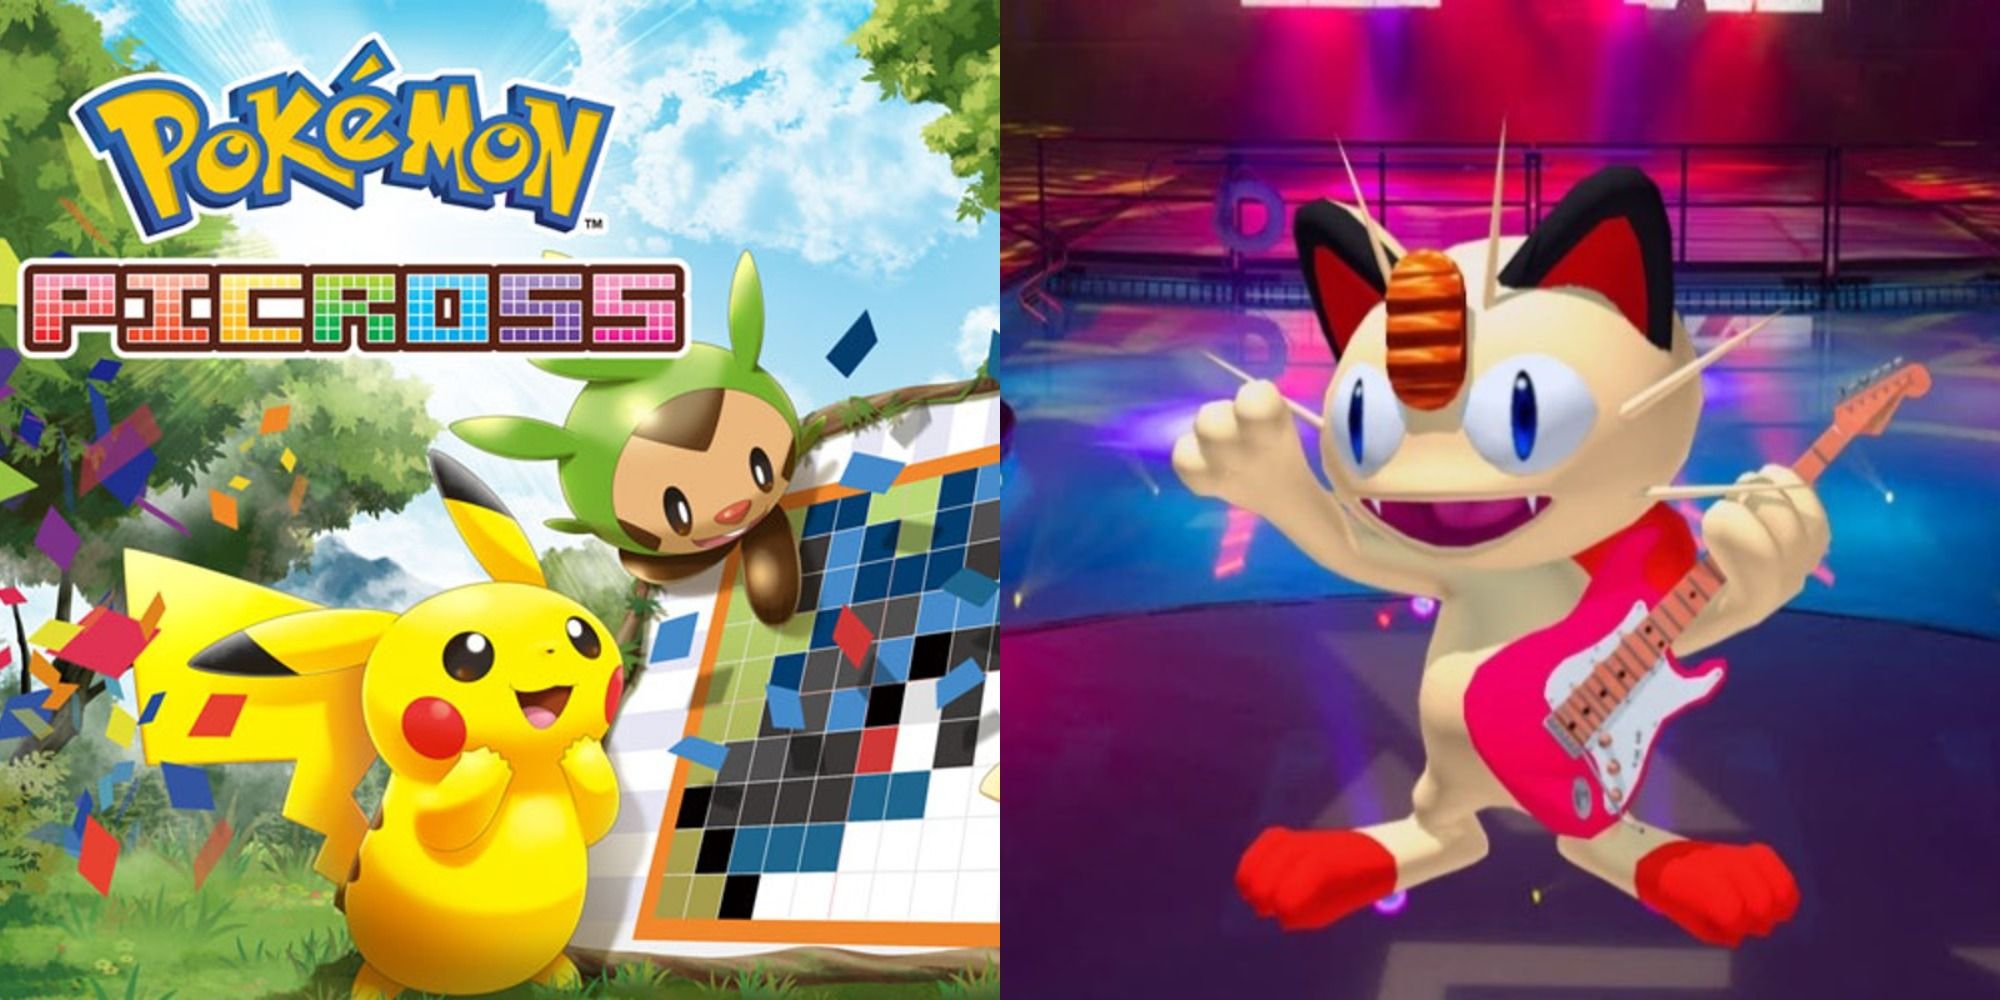 Cancelled Online Pokemon Project Details Leaked